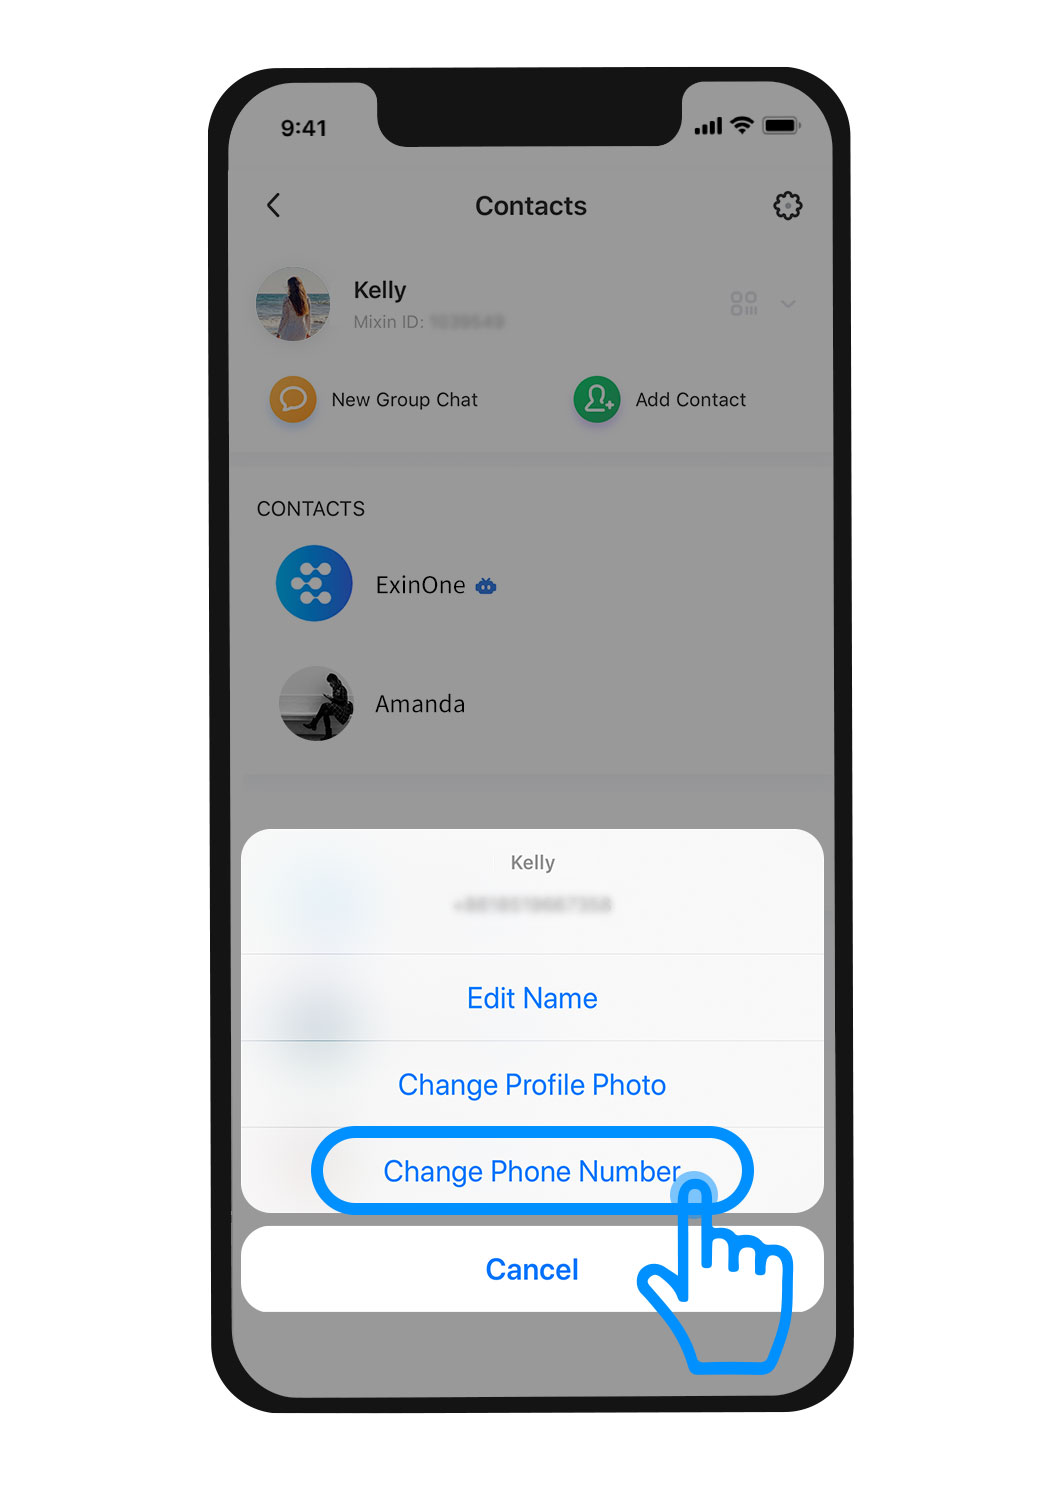 How to change Phone number? - Mixin Messenger